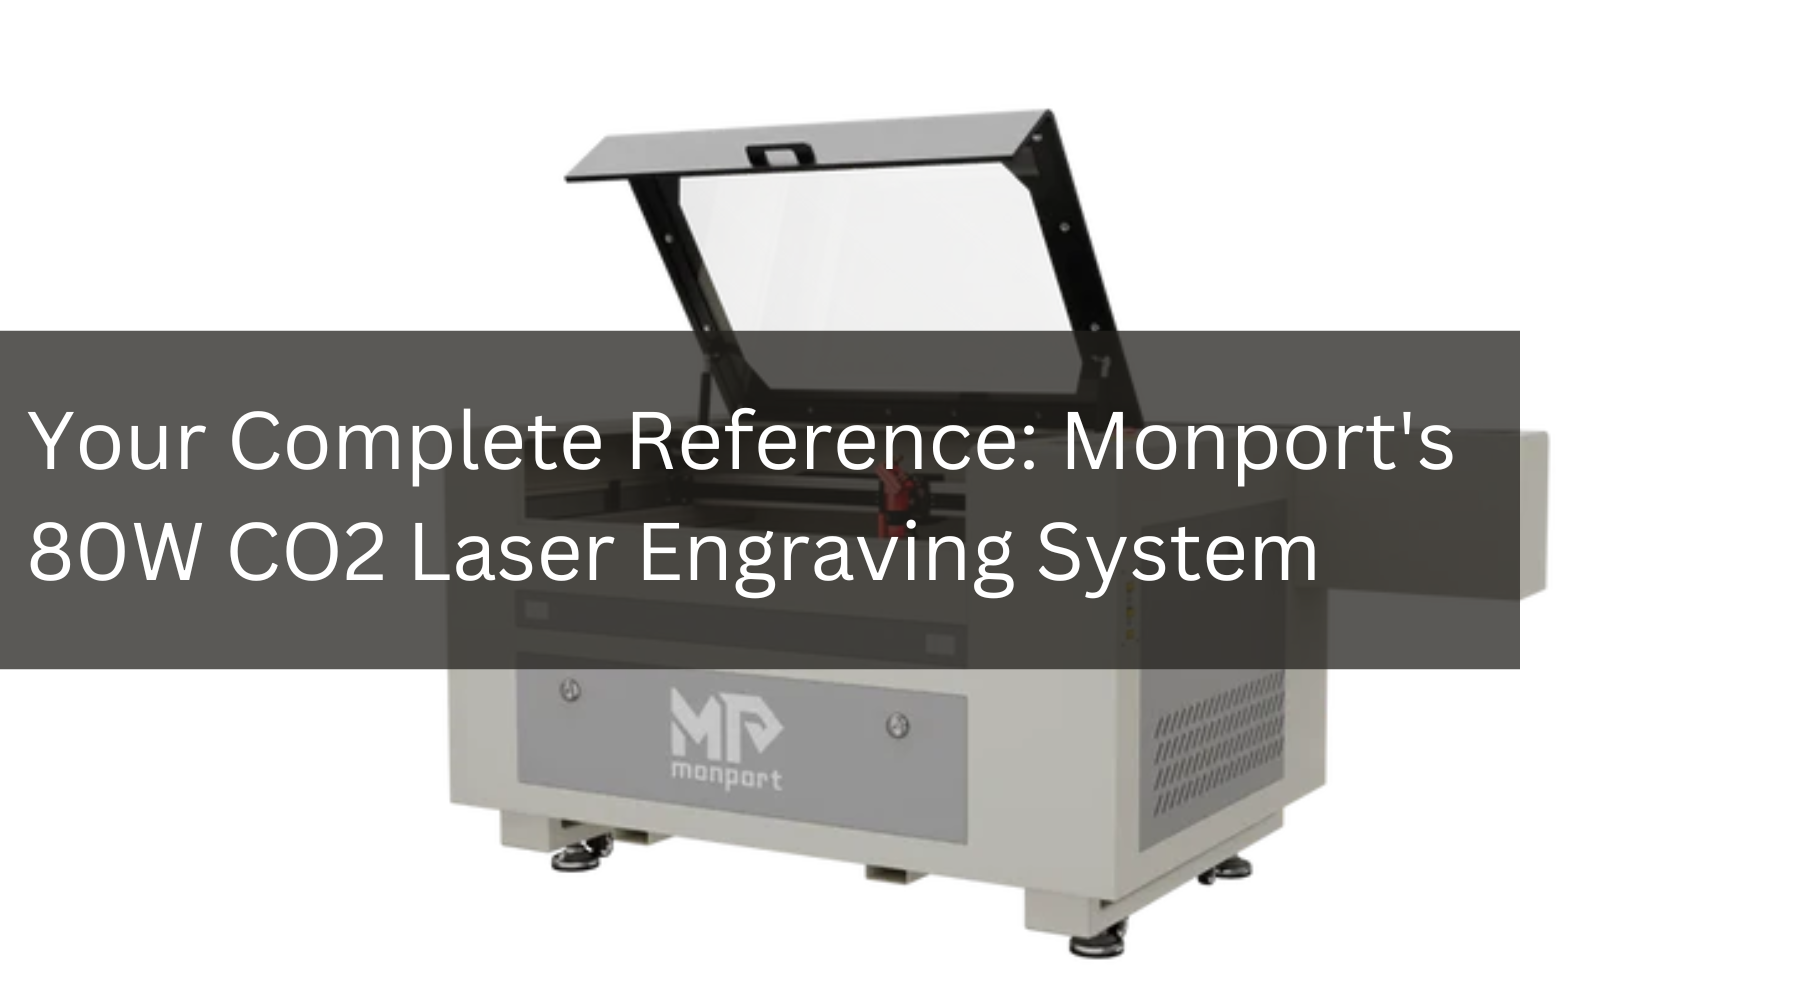 Your Complete Reference: Monport's 80W CO2 Laser Engraving System